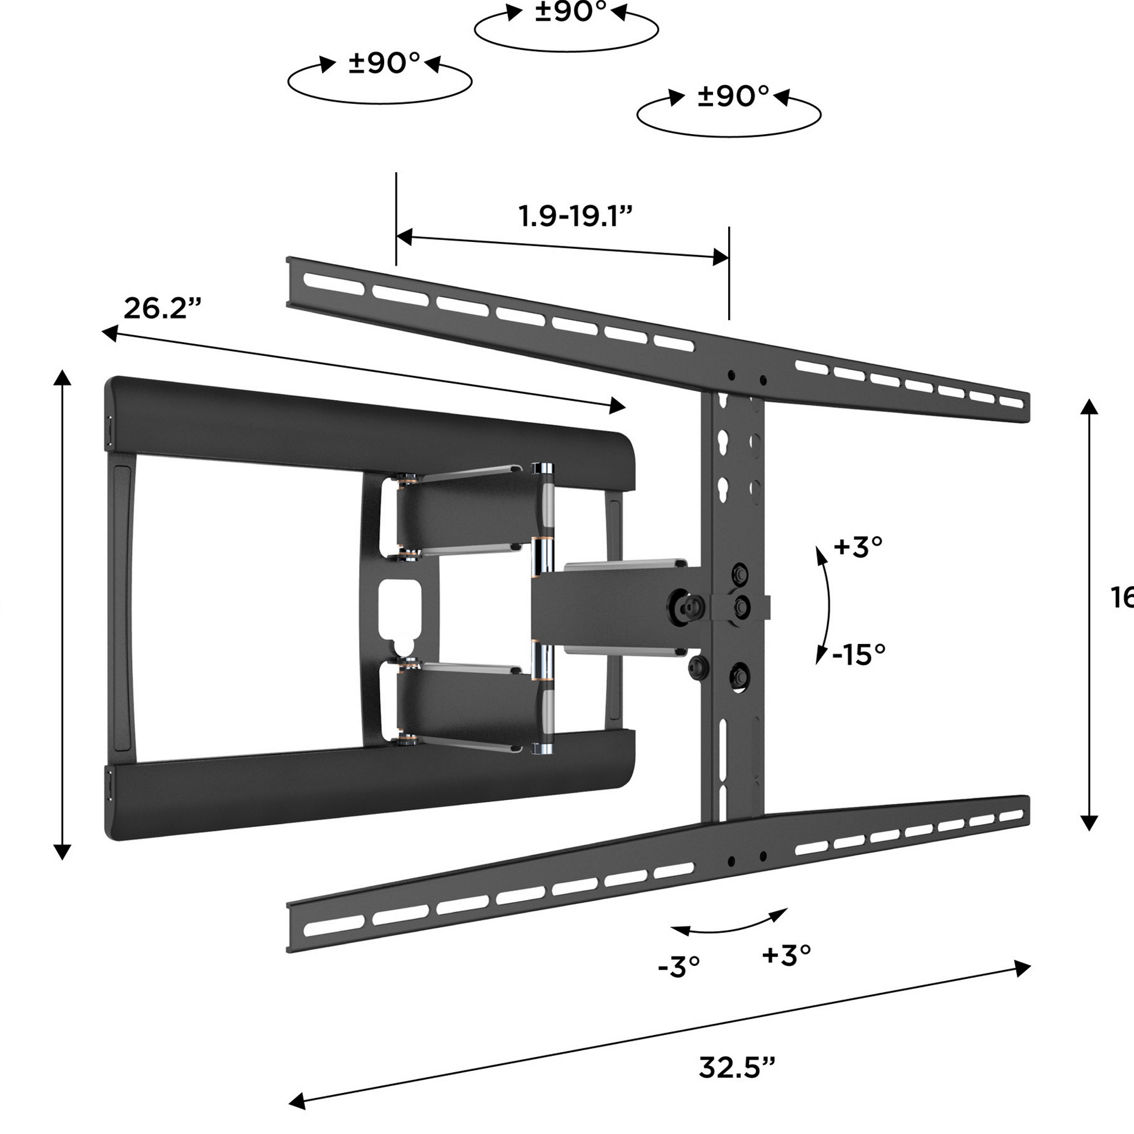 ProMounts Pro Full Motion TV Wall Mount for 37 to 85 in. TVs up to 120 lb. - Image 8 of 10